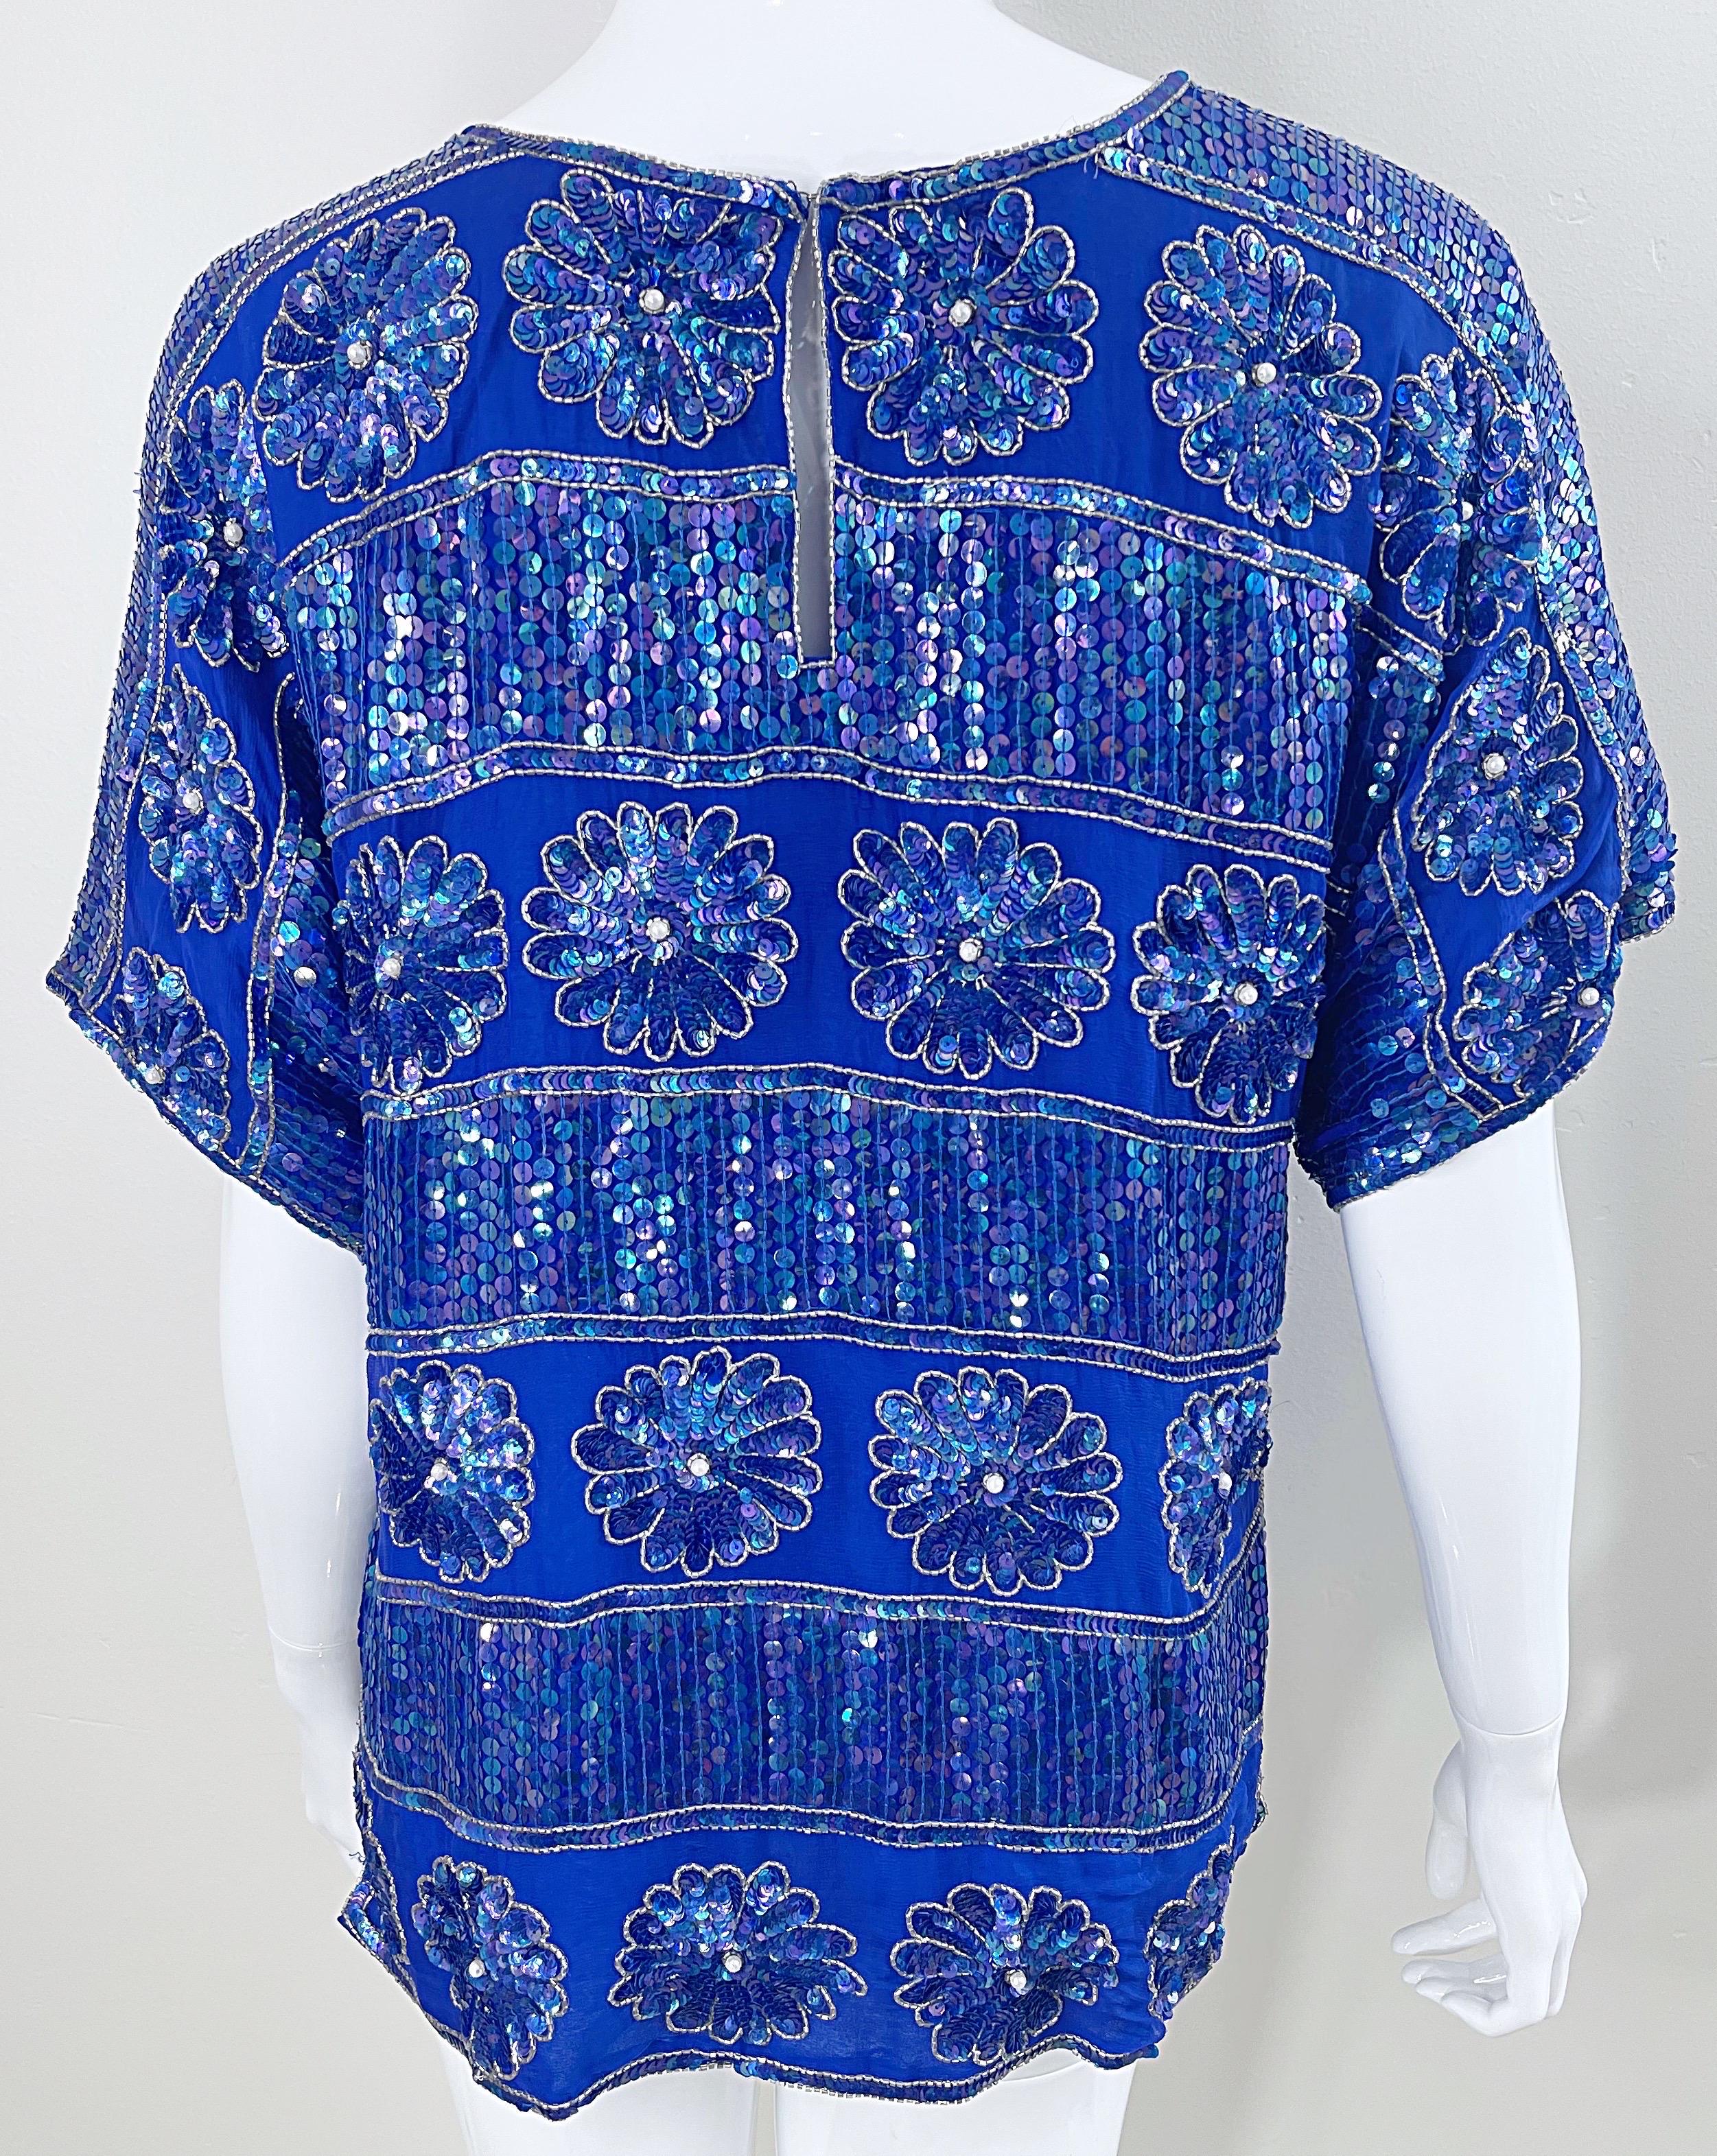 Women's 1980s Royal Blue Silk Chiffon Sequin Beaded Pearl Vintage 80s Blouse Shirt Top For Sale